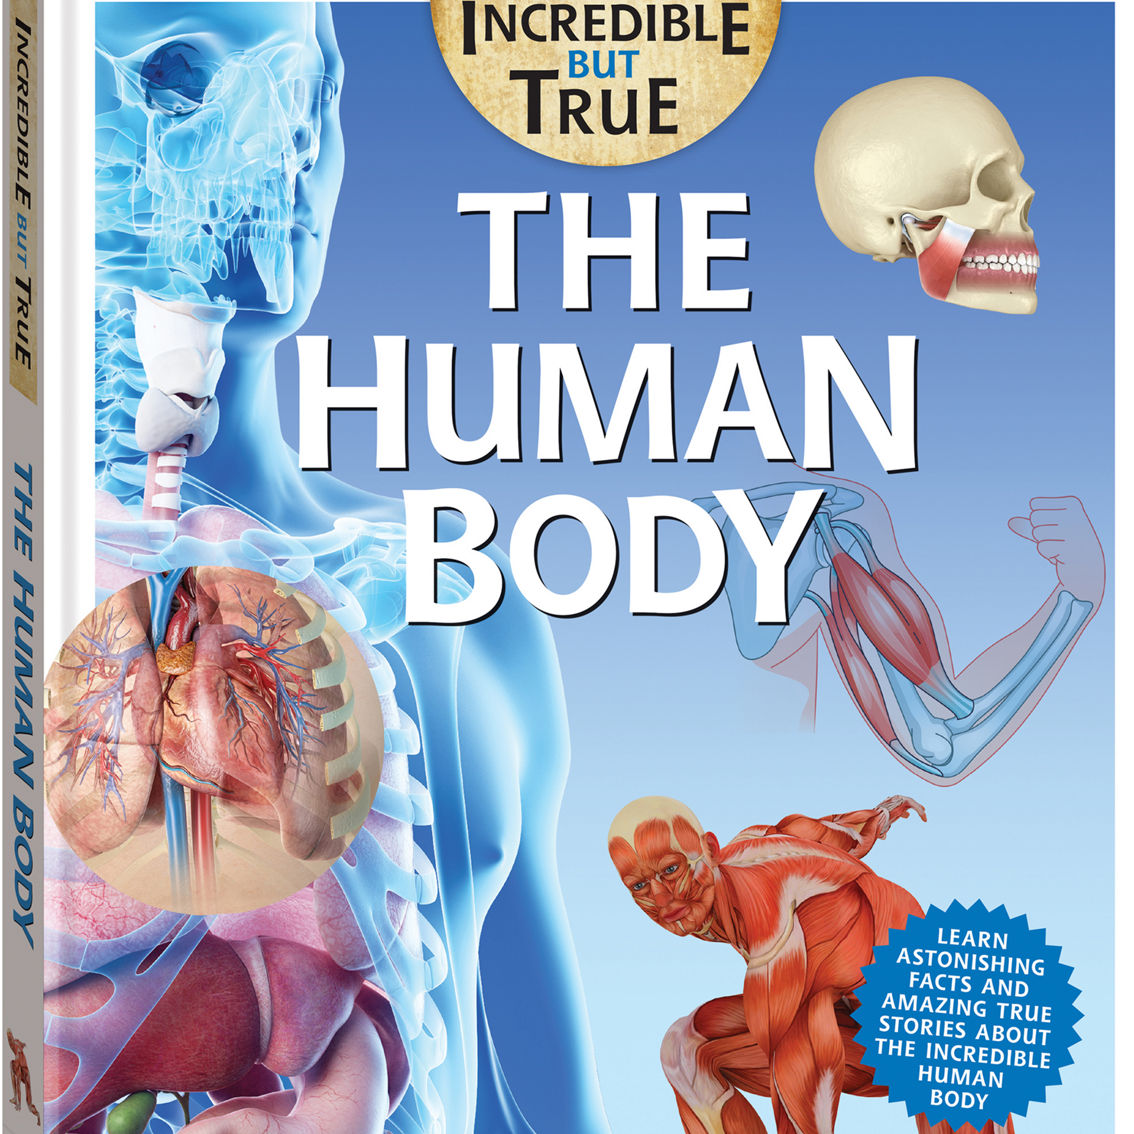 Incredible But True: The Human Body Hardcover Book - Image 2 of 5